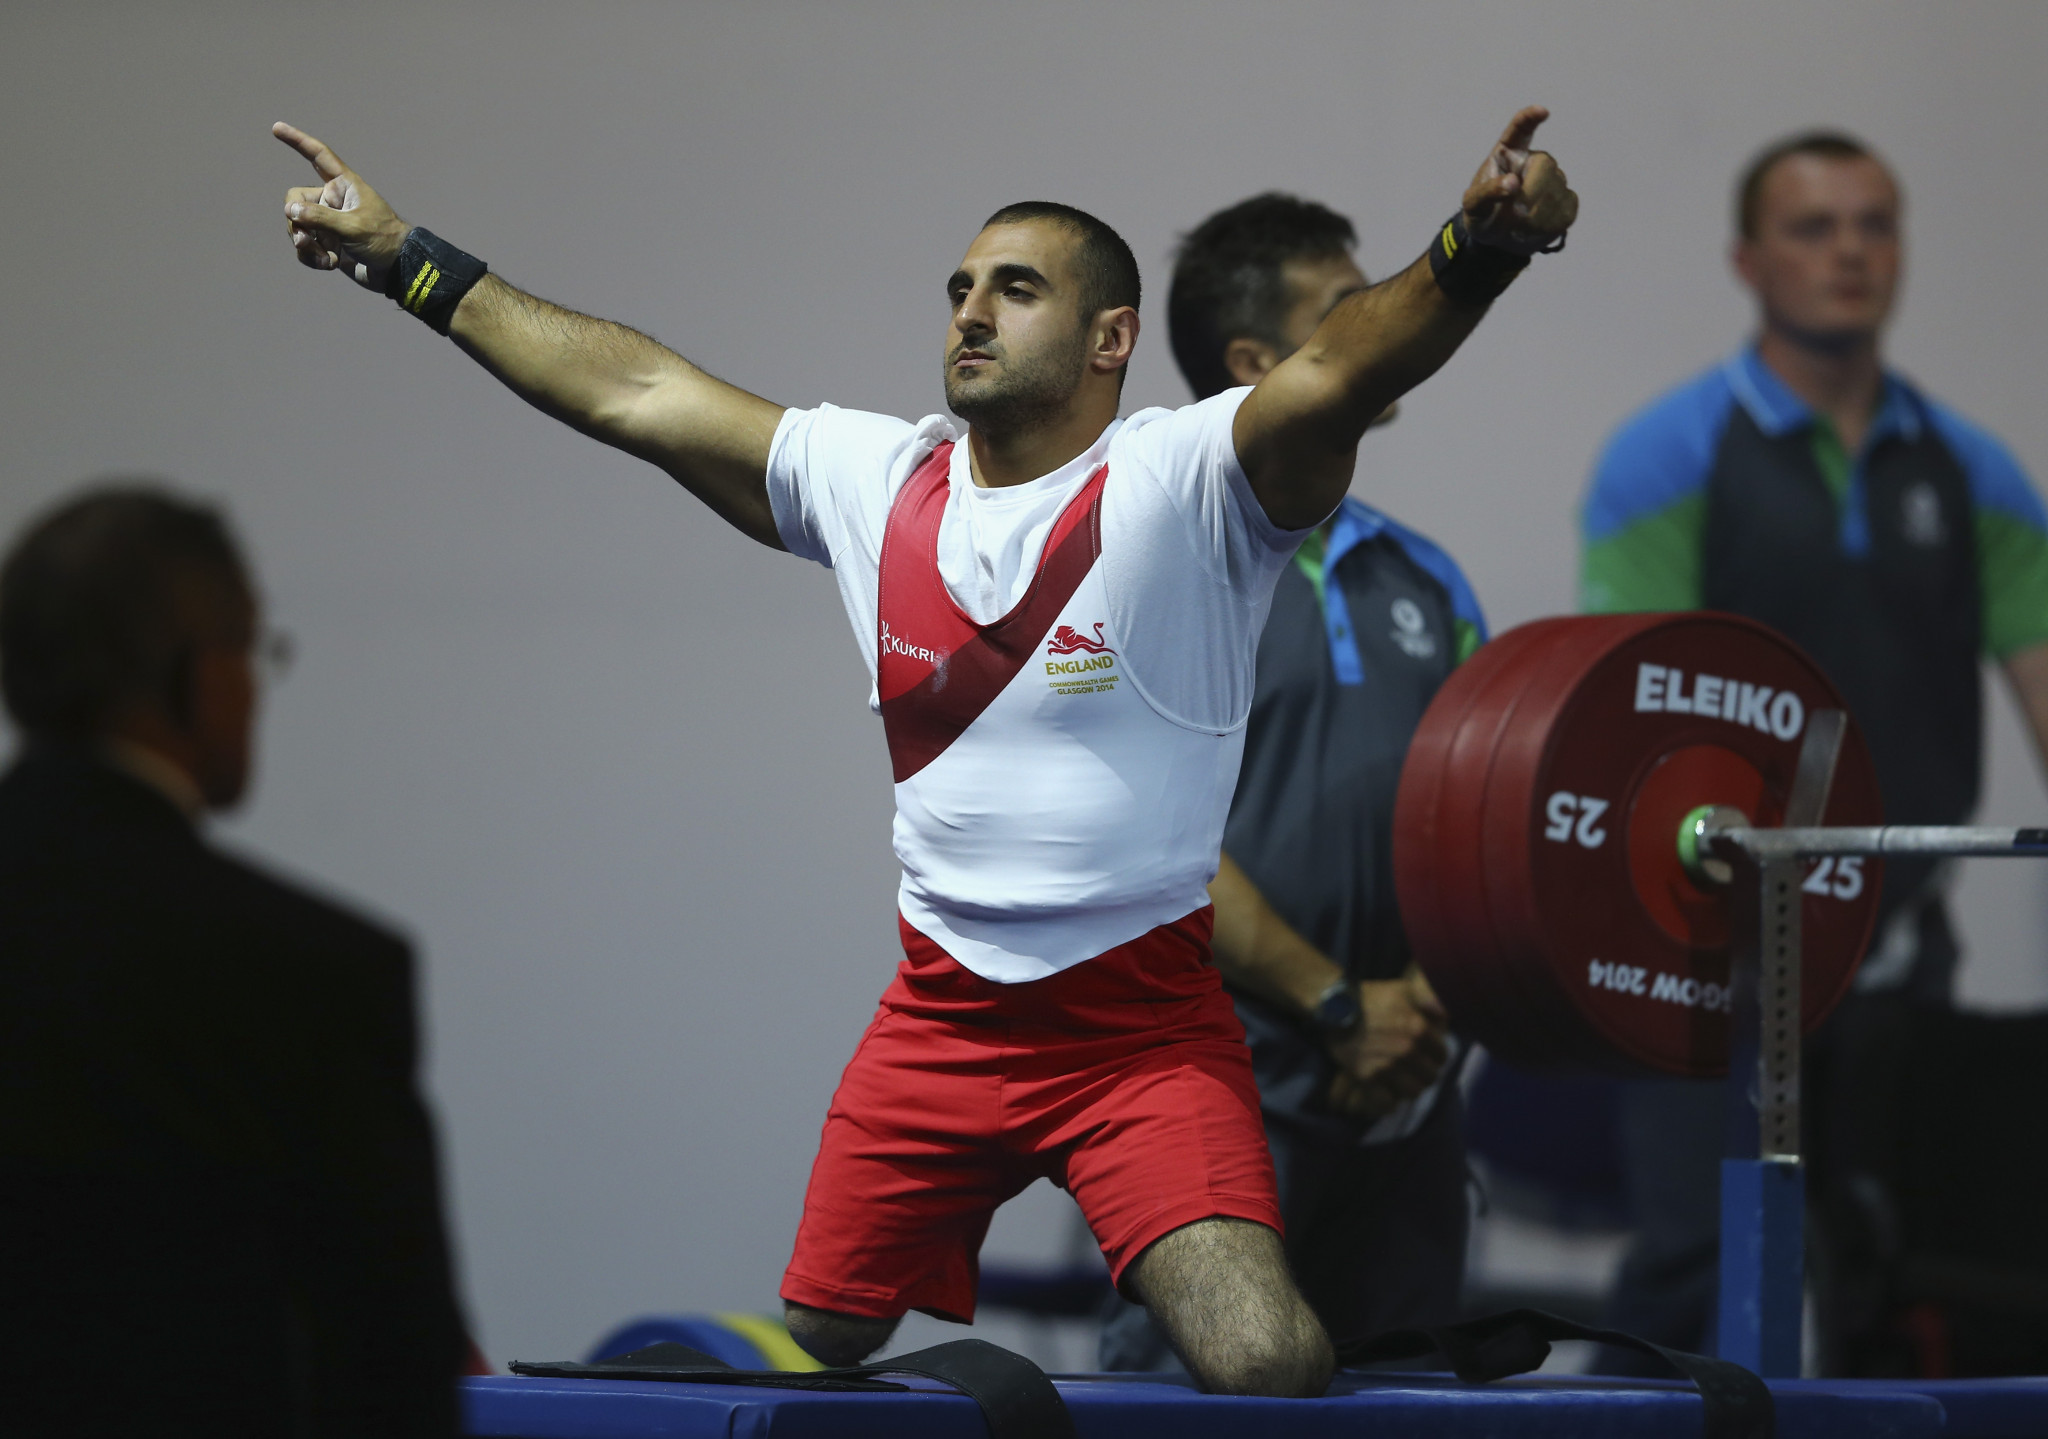 British powerlifter Ali Jawad has pledged to take part in the 2.6 Challenge ©Getty Images